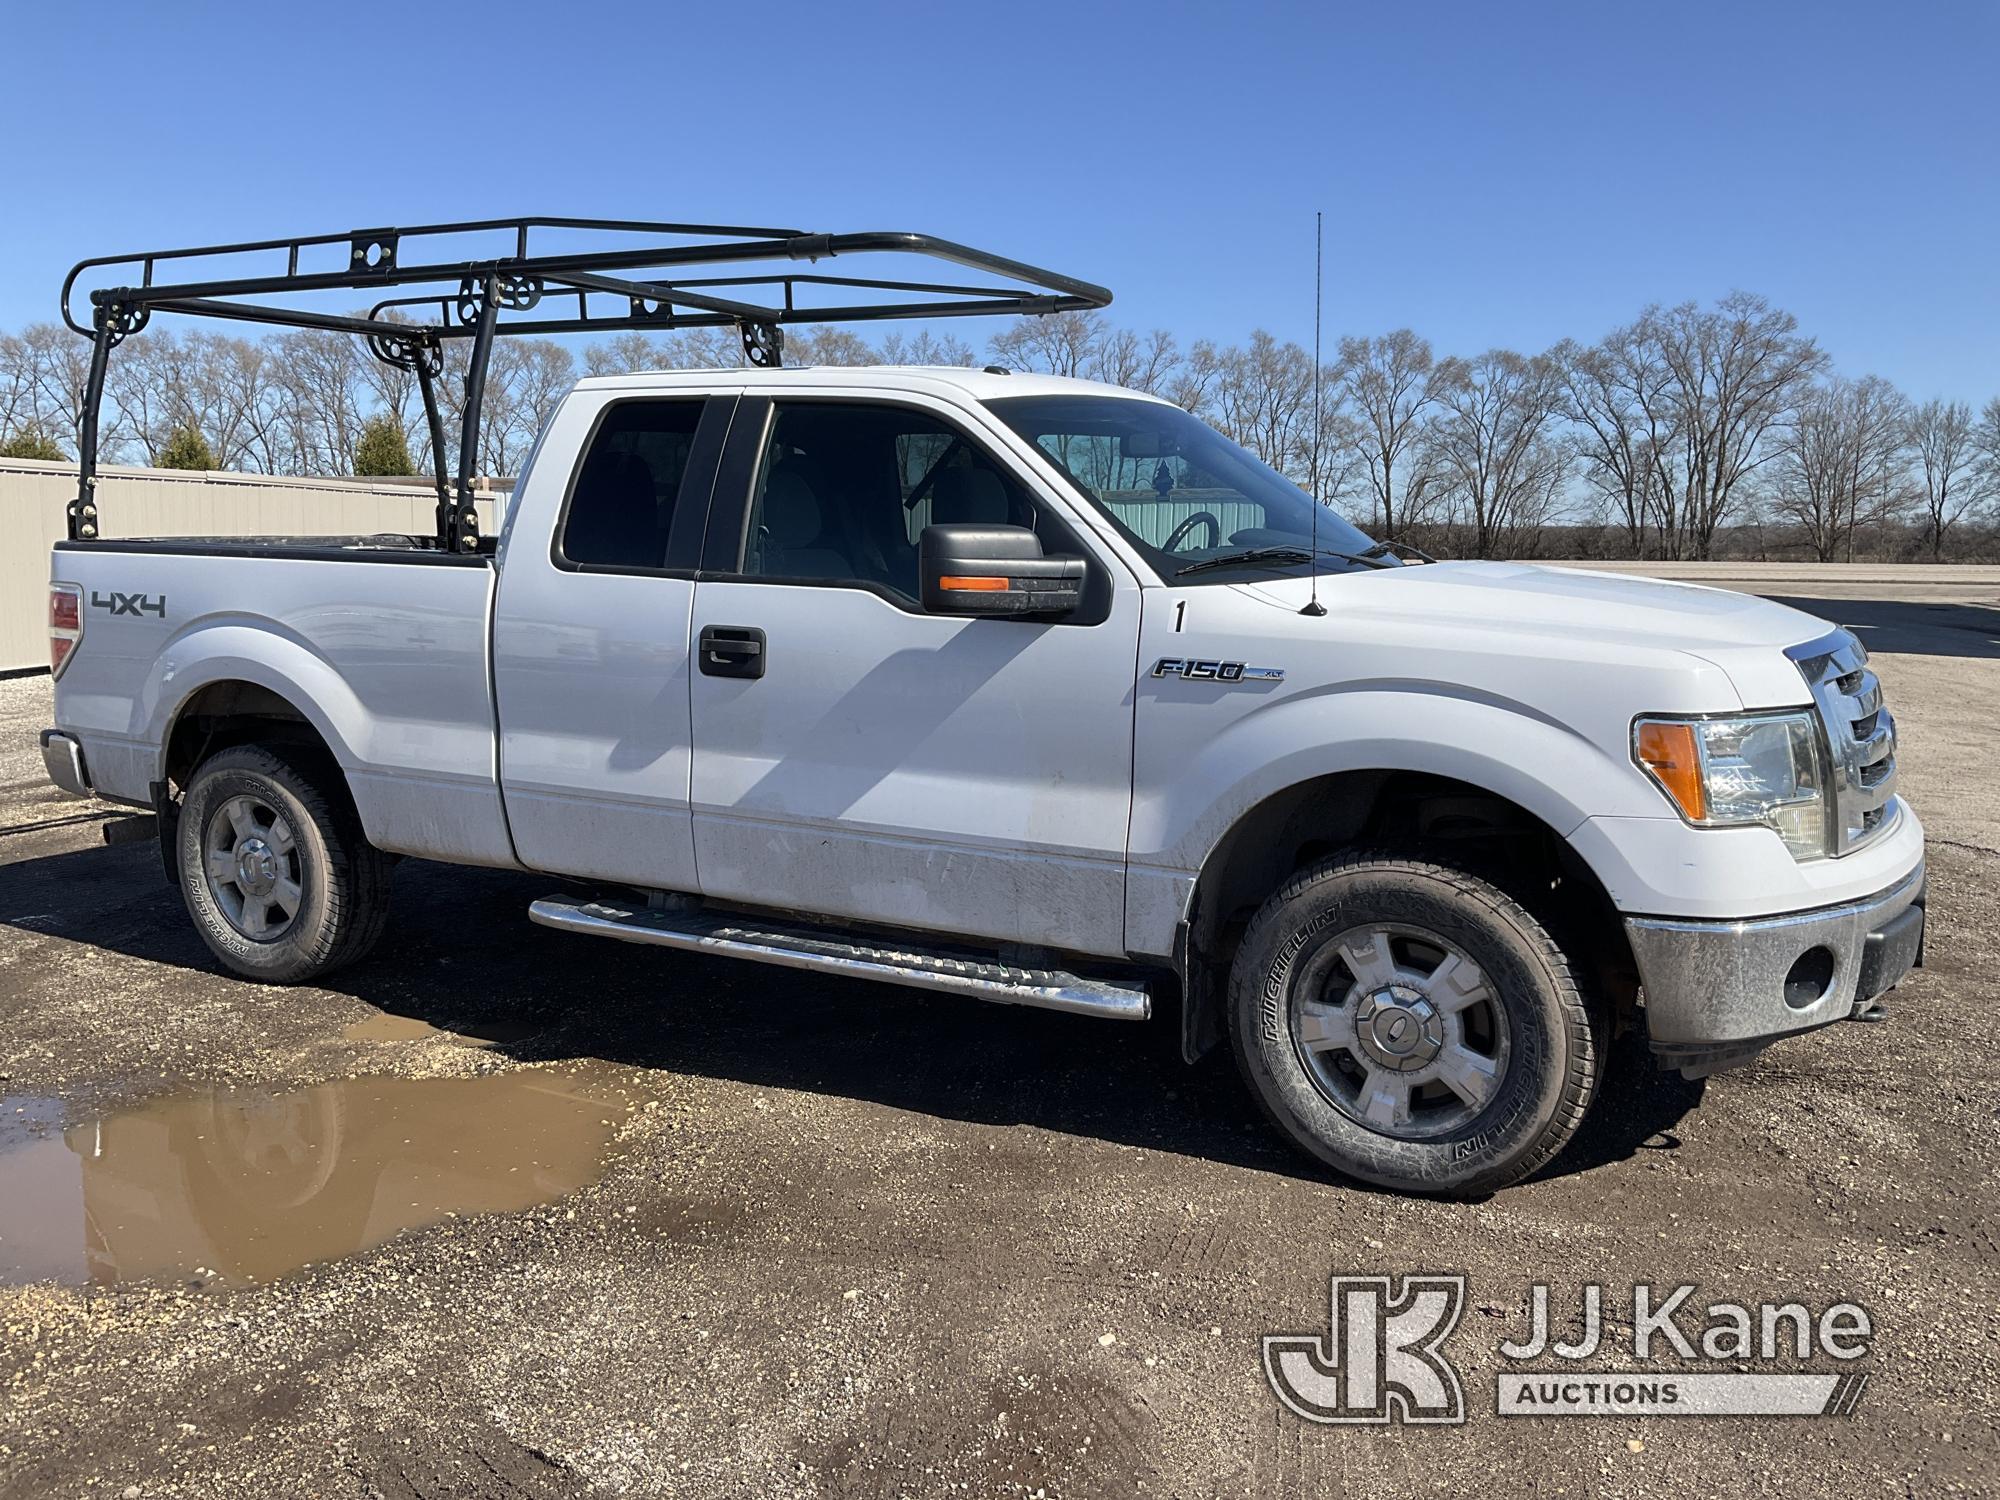 (South Beloit, IL) 2012 Ford F150 4x4 Extended-Cab Pickup Truck Runs, Moves, No Power Steering-Not R